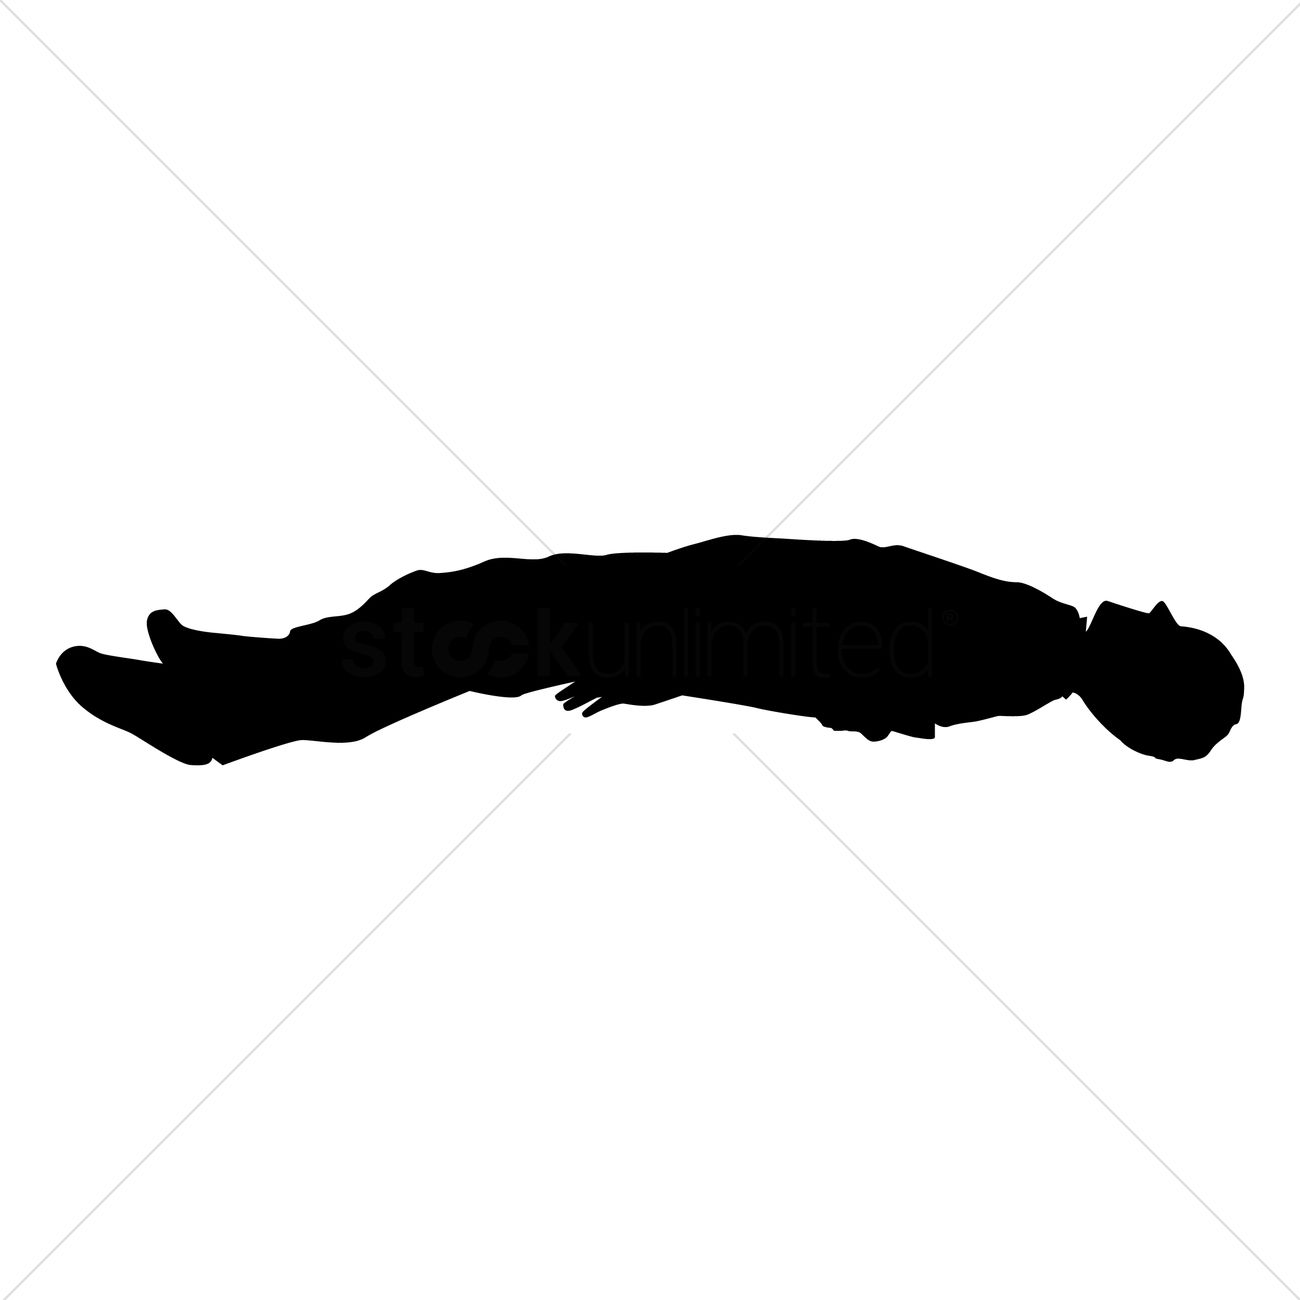 Man Lying Down With Legs Up. 